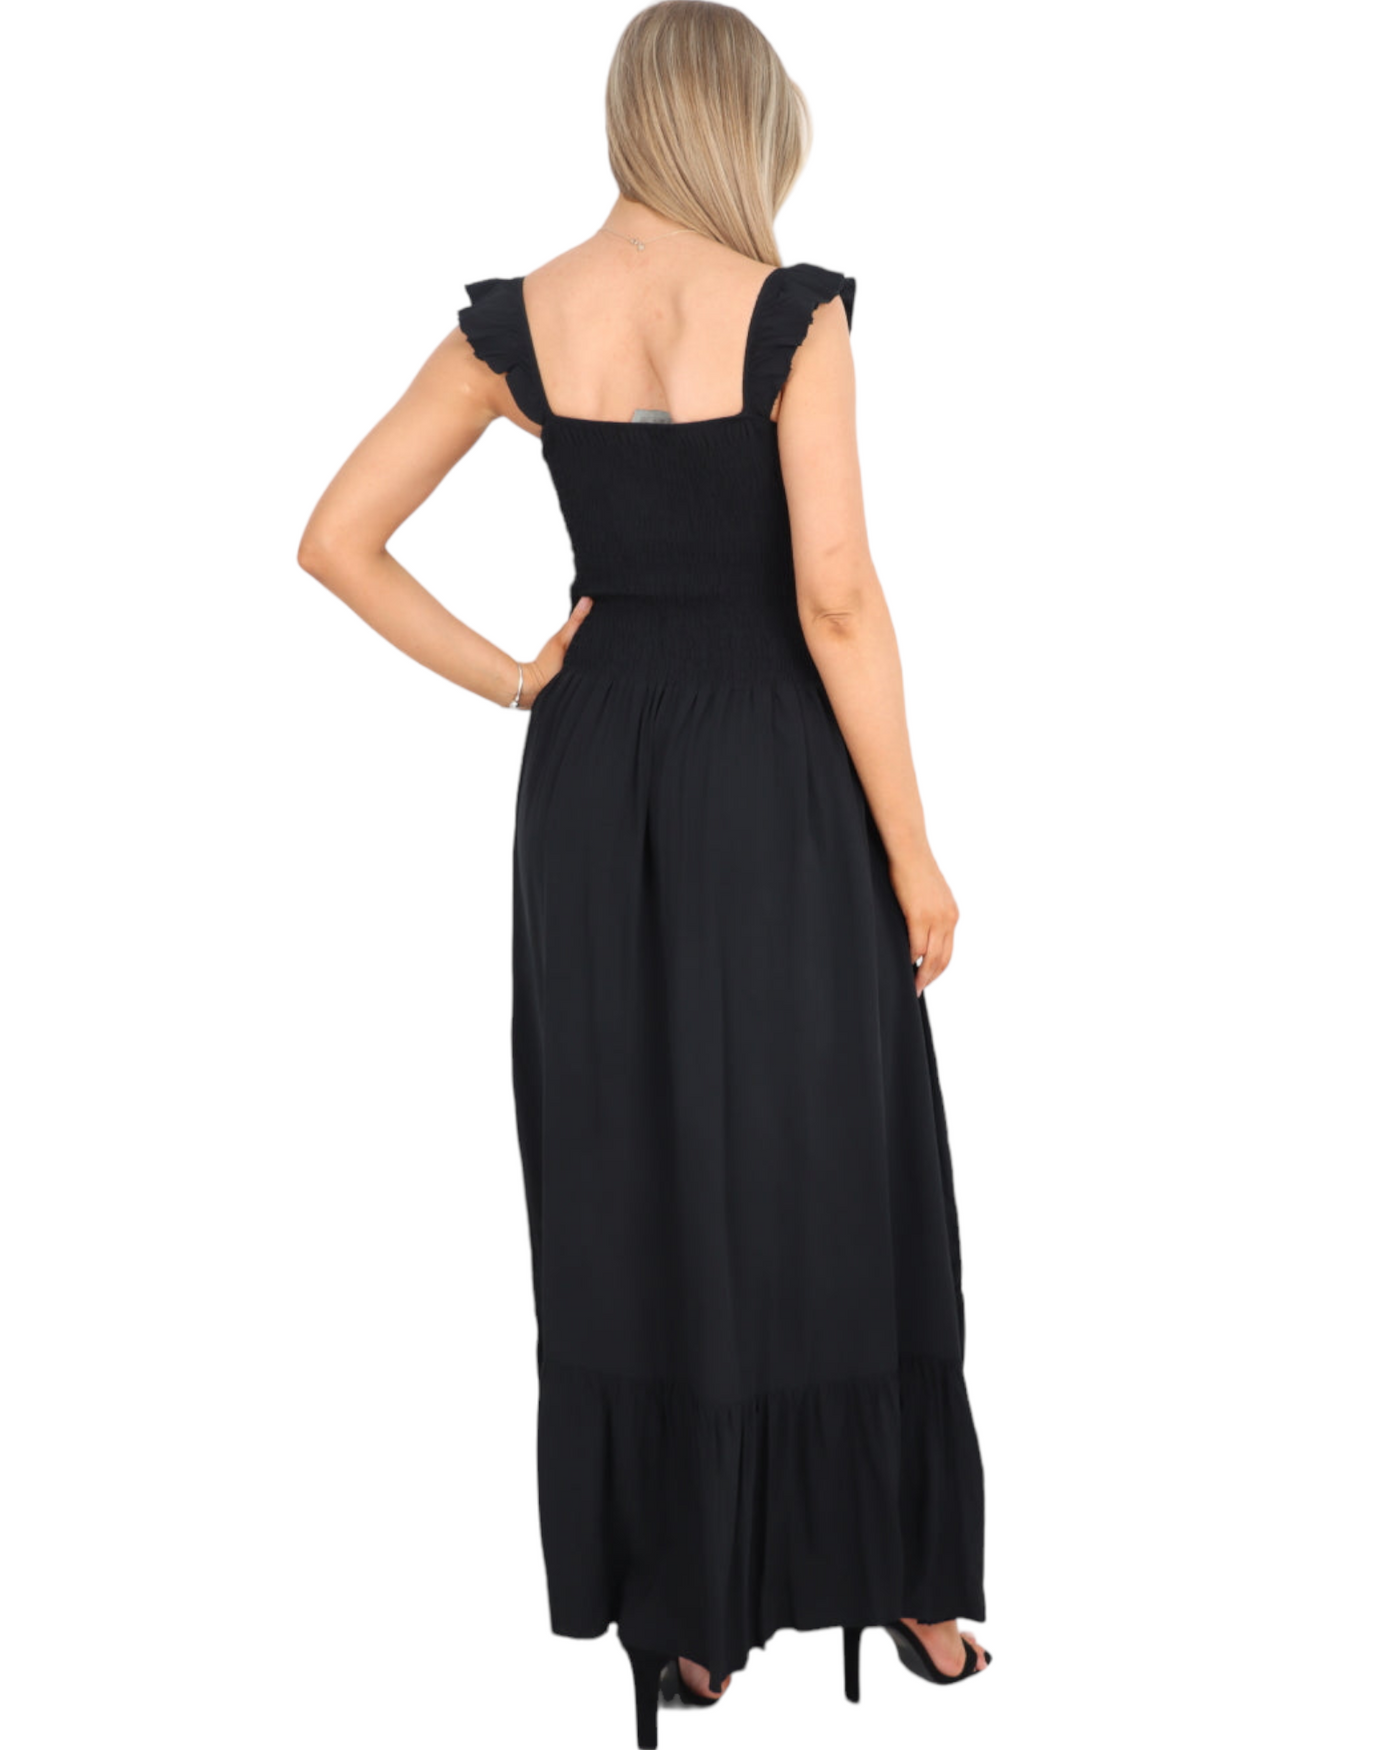 Frill Strap Shirred Elasticated Tiered Maxi Dress